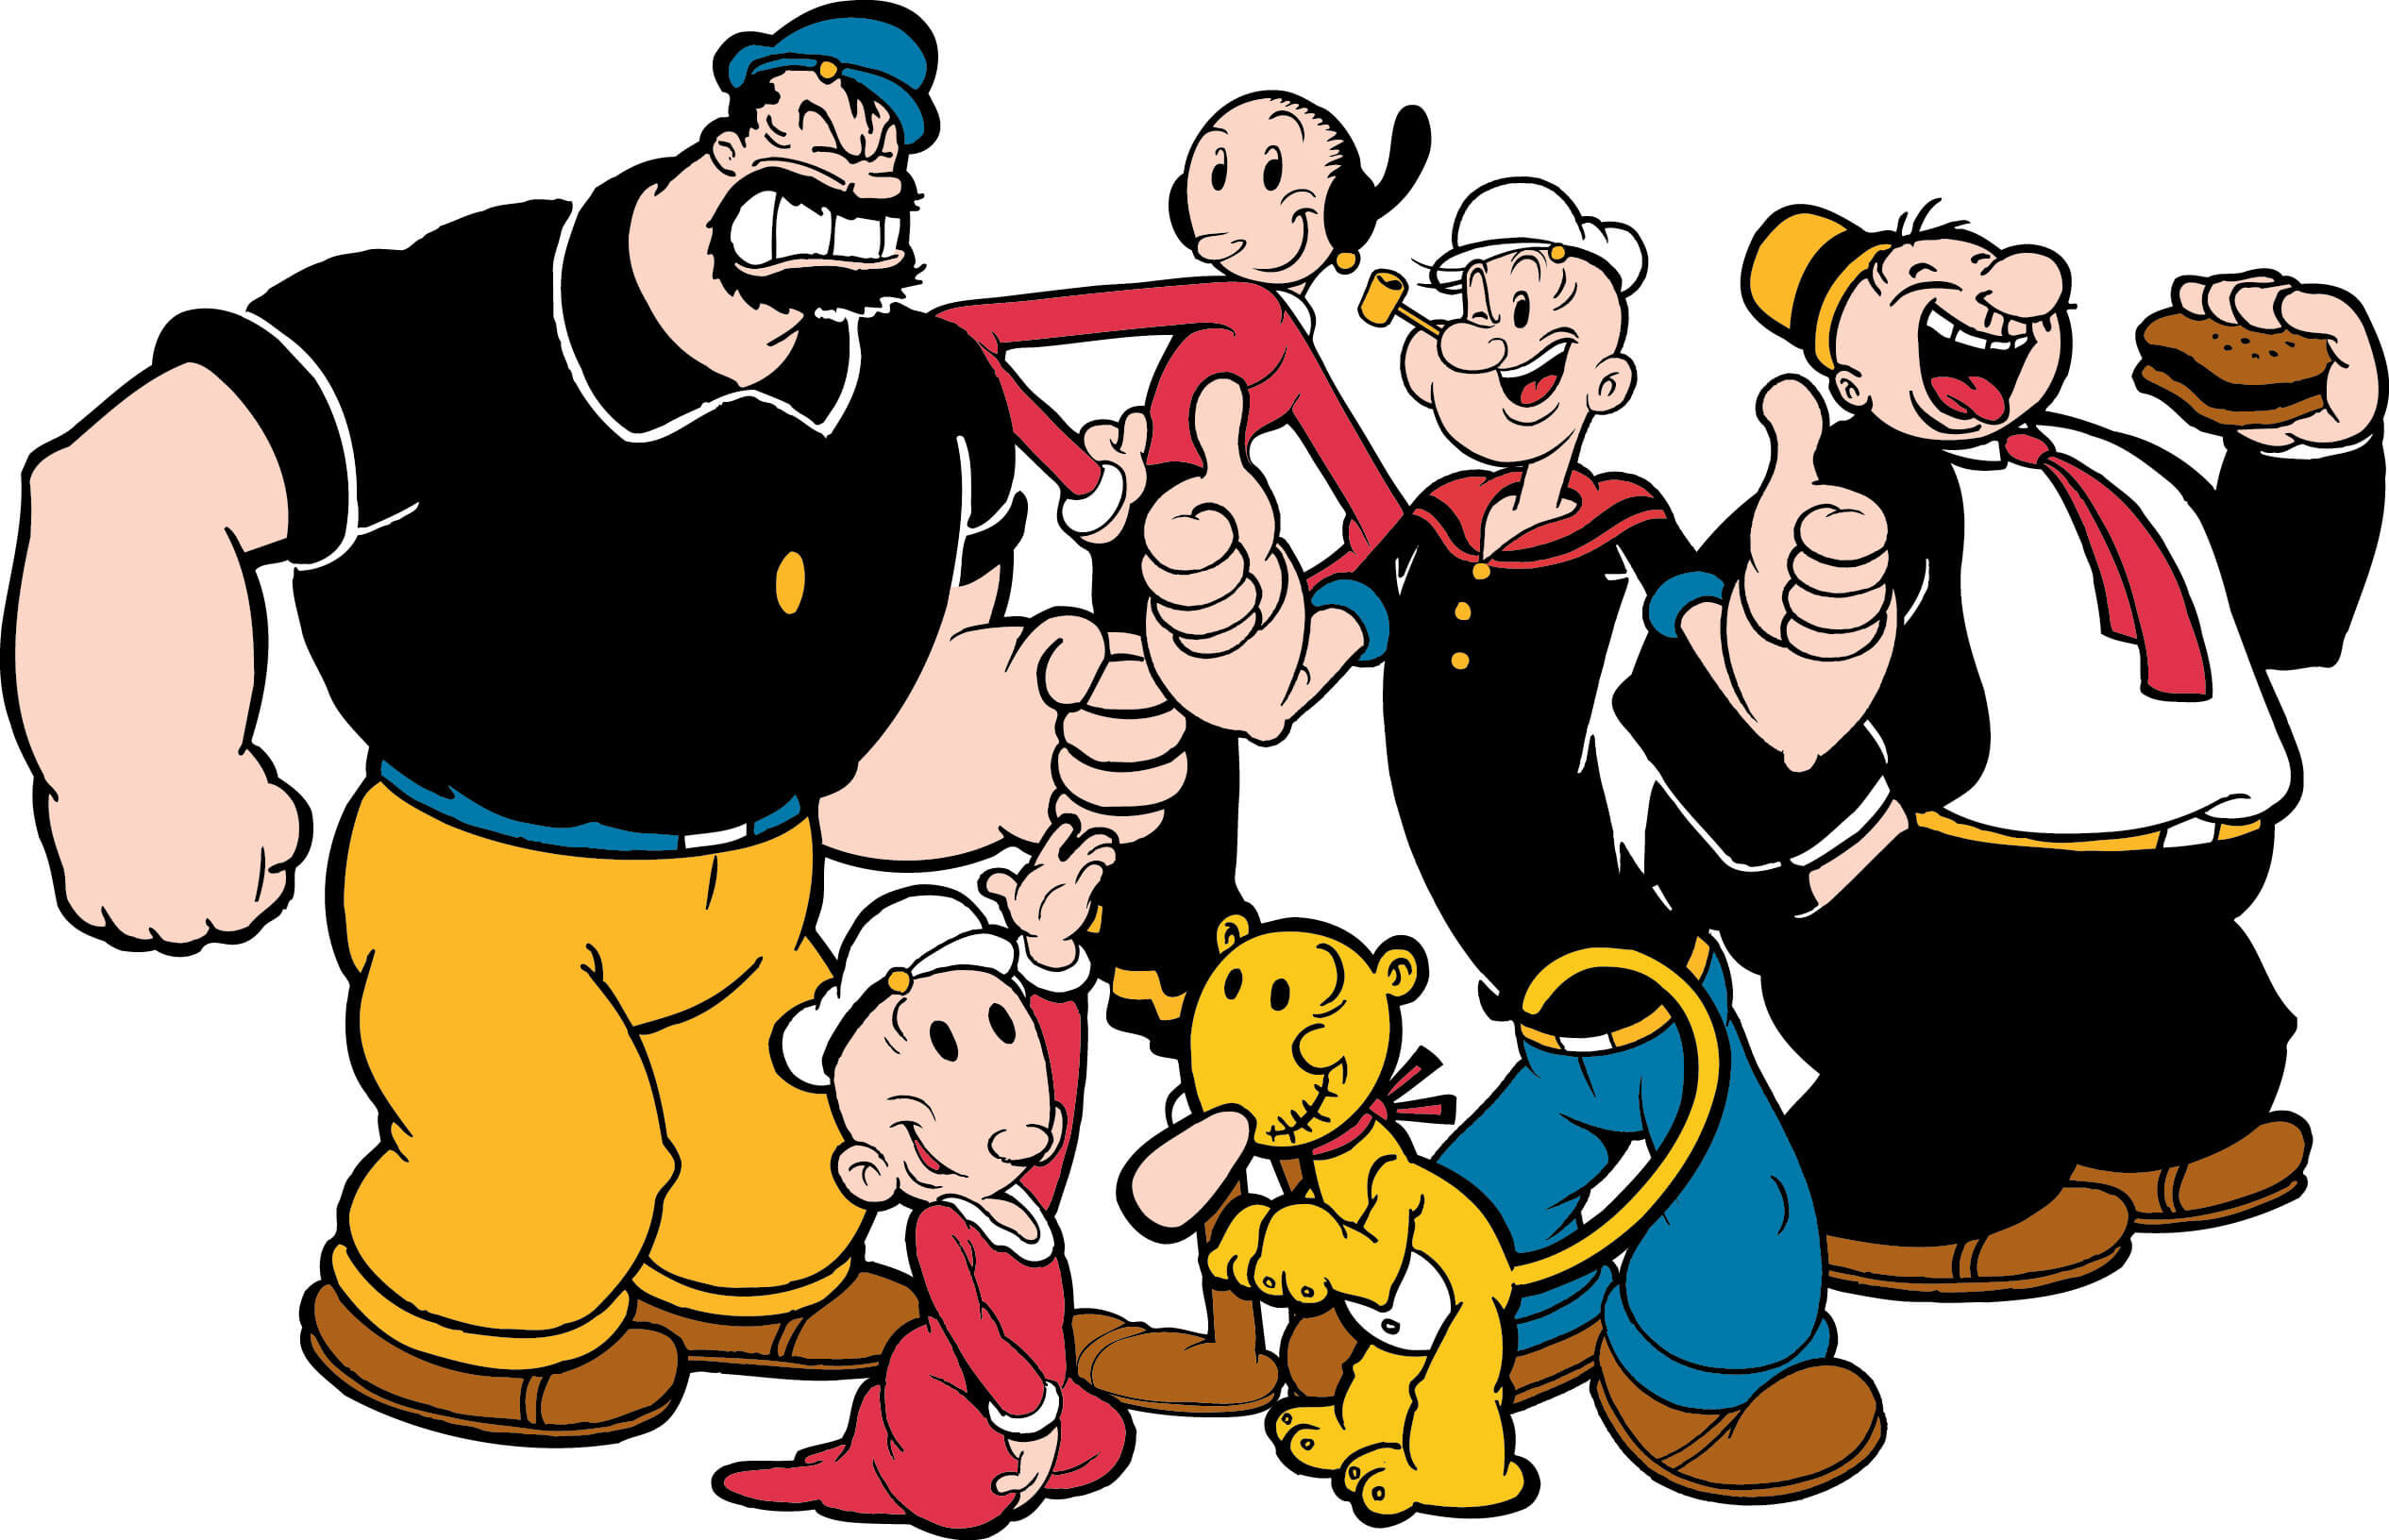 Fred & Ginger on Board For Popeye image